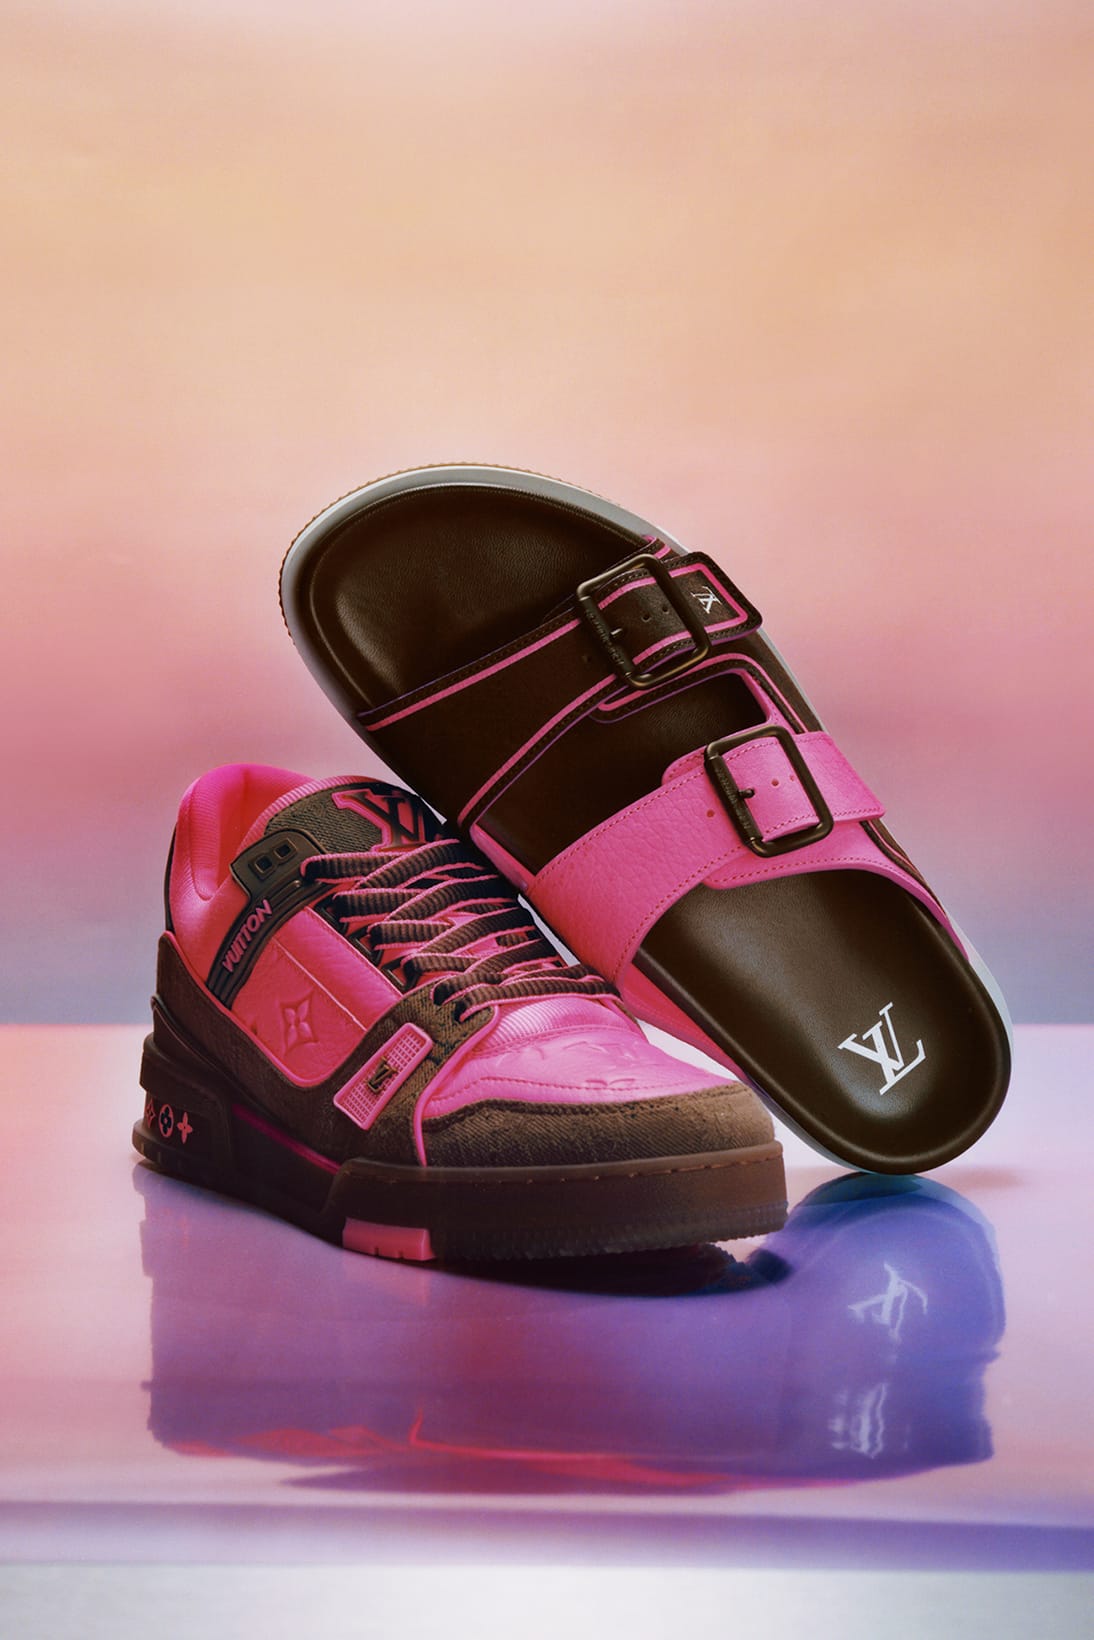 Check Out Louis Vuitton's New LVSK8 and High 8 Sneakers - Sneaker Freaker